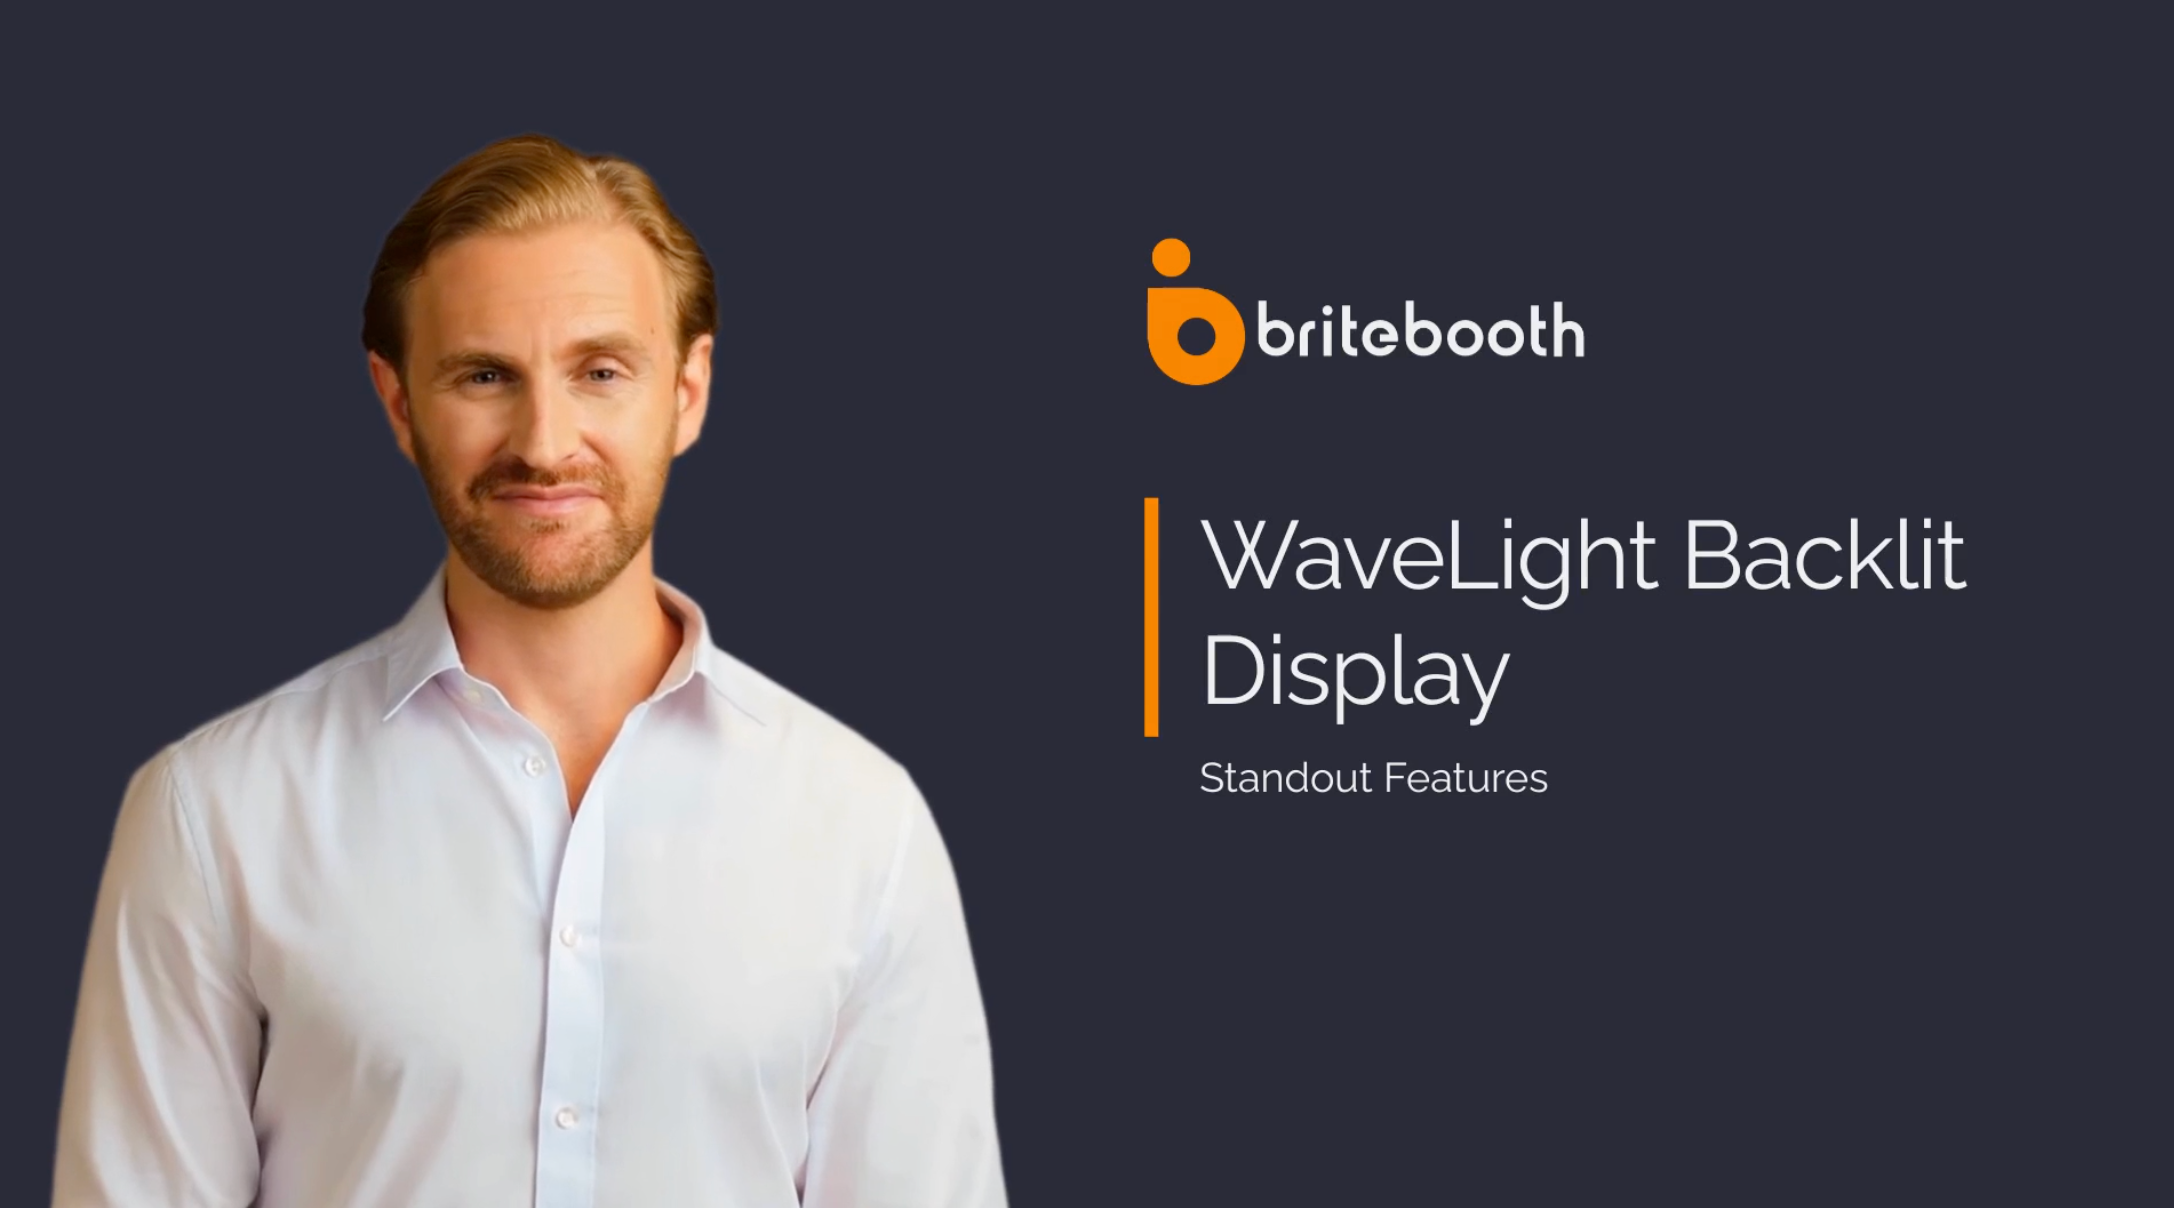 Load video: Features and benefits of the WaveLight Backlit Display